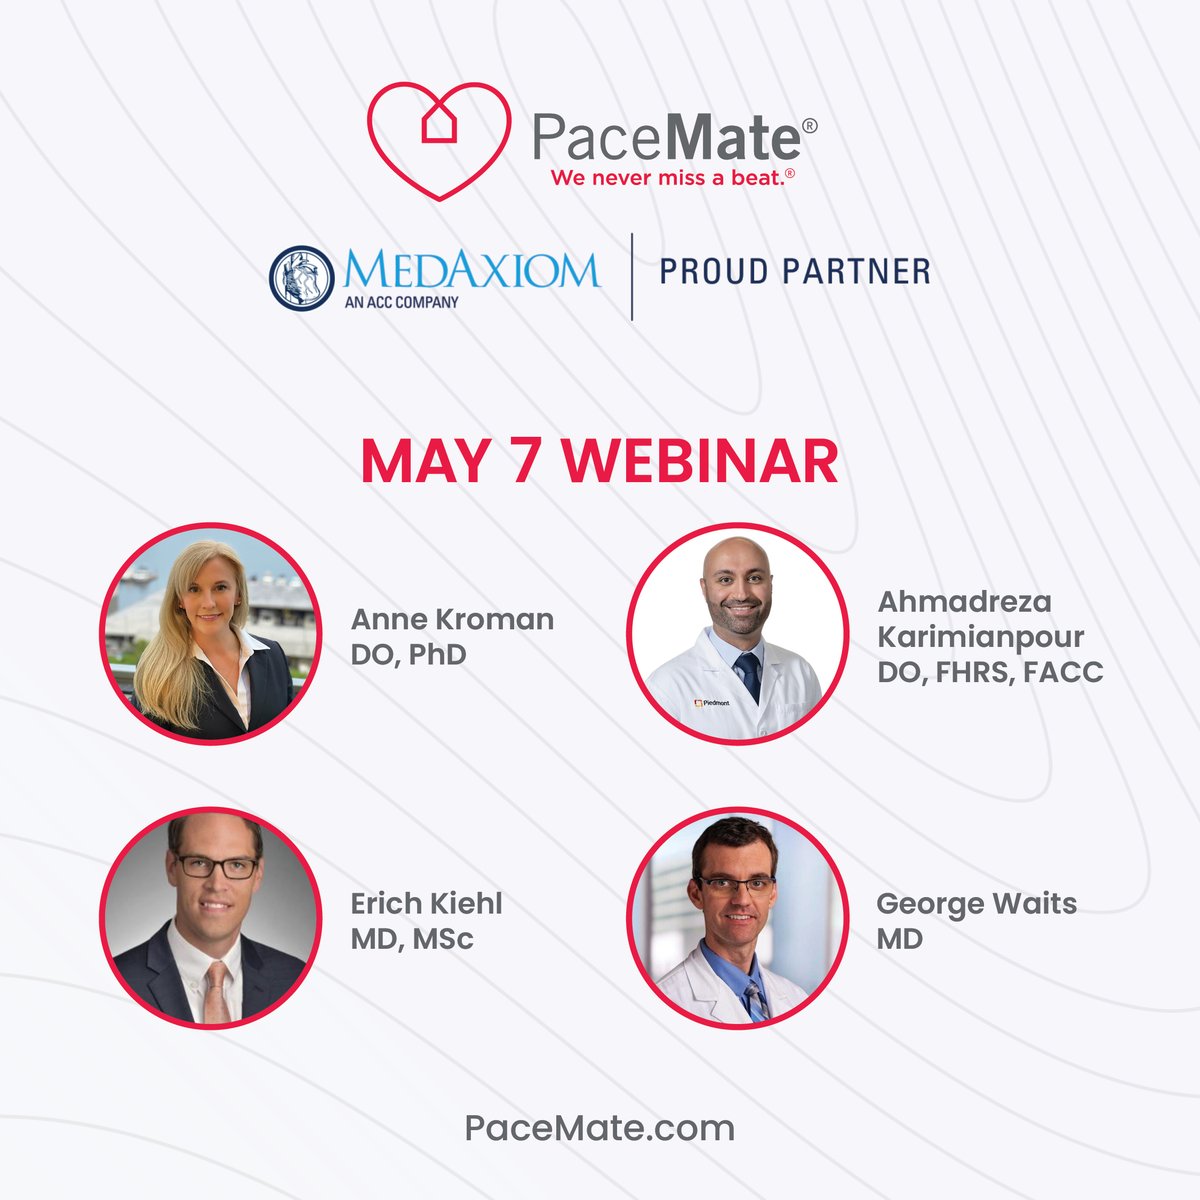 WEBINAR TOMORROW Sponsored by PaceMate and @MedAxiom Leveraging Analytics to Drive Clinical and Operational Strategies for Ventricular Tachycardia, Heart Failure Therapy, + Lead Management REGISTER TODAY bit.ly/49lKIMU #EPeeps #webinar